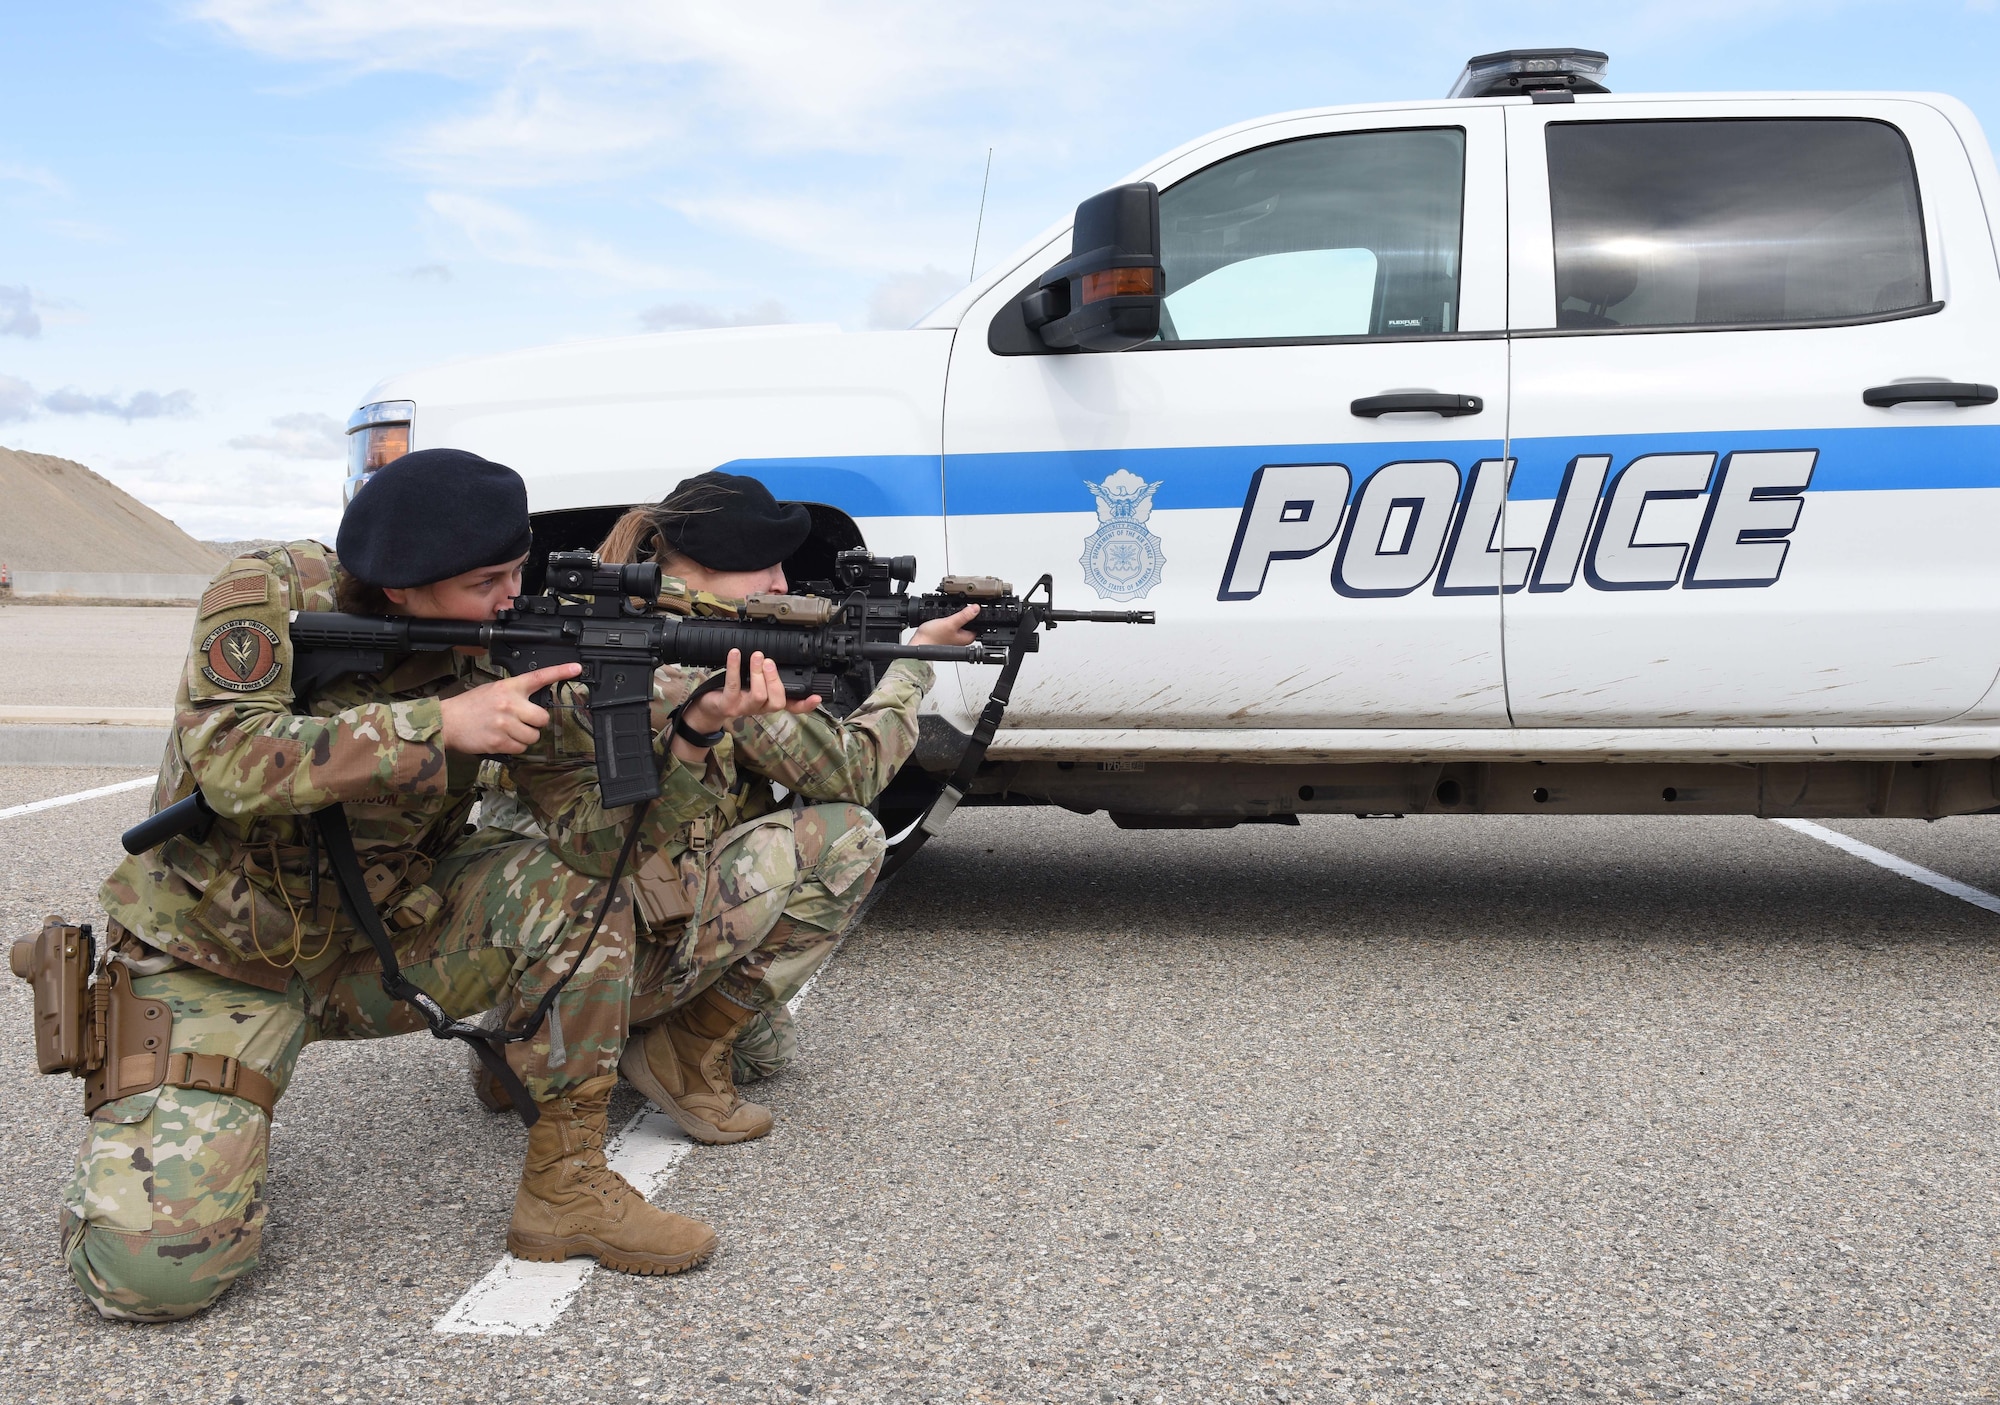 Two female Security Forces Airmen pose with their weapons in front of a police truck.